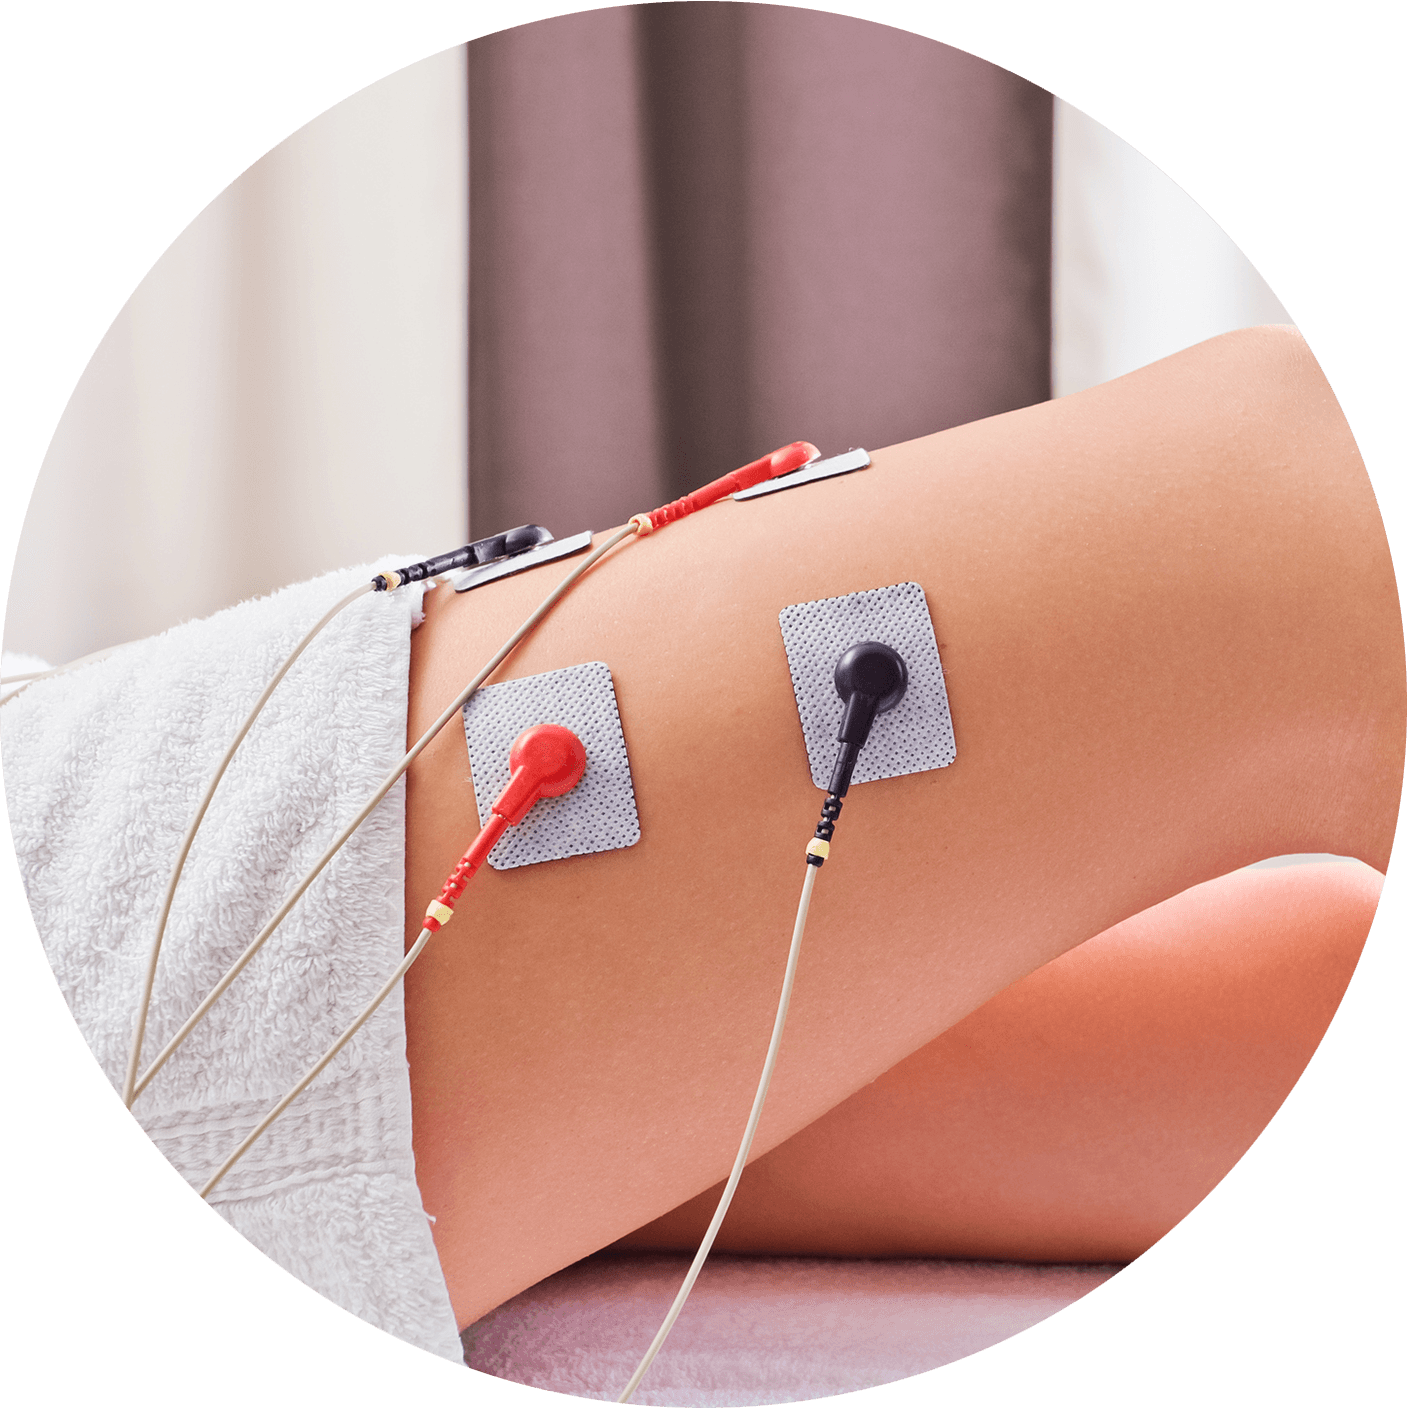 om physiotherapy, Electrotherapy